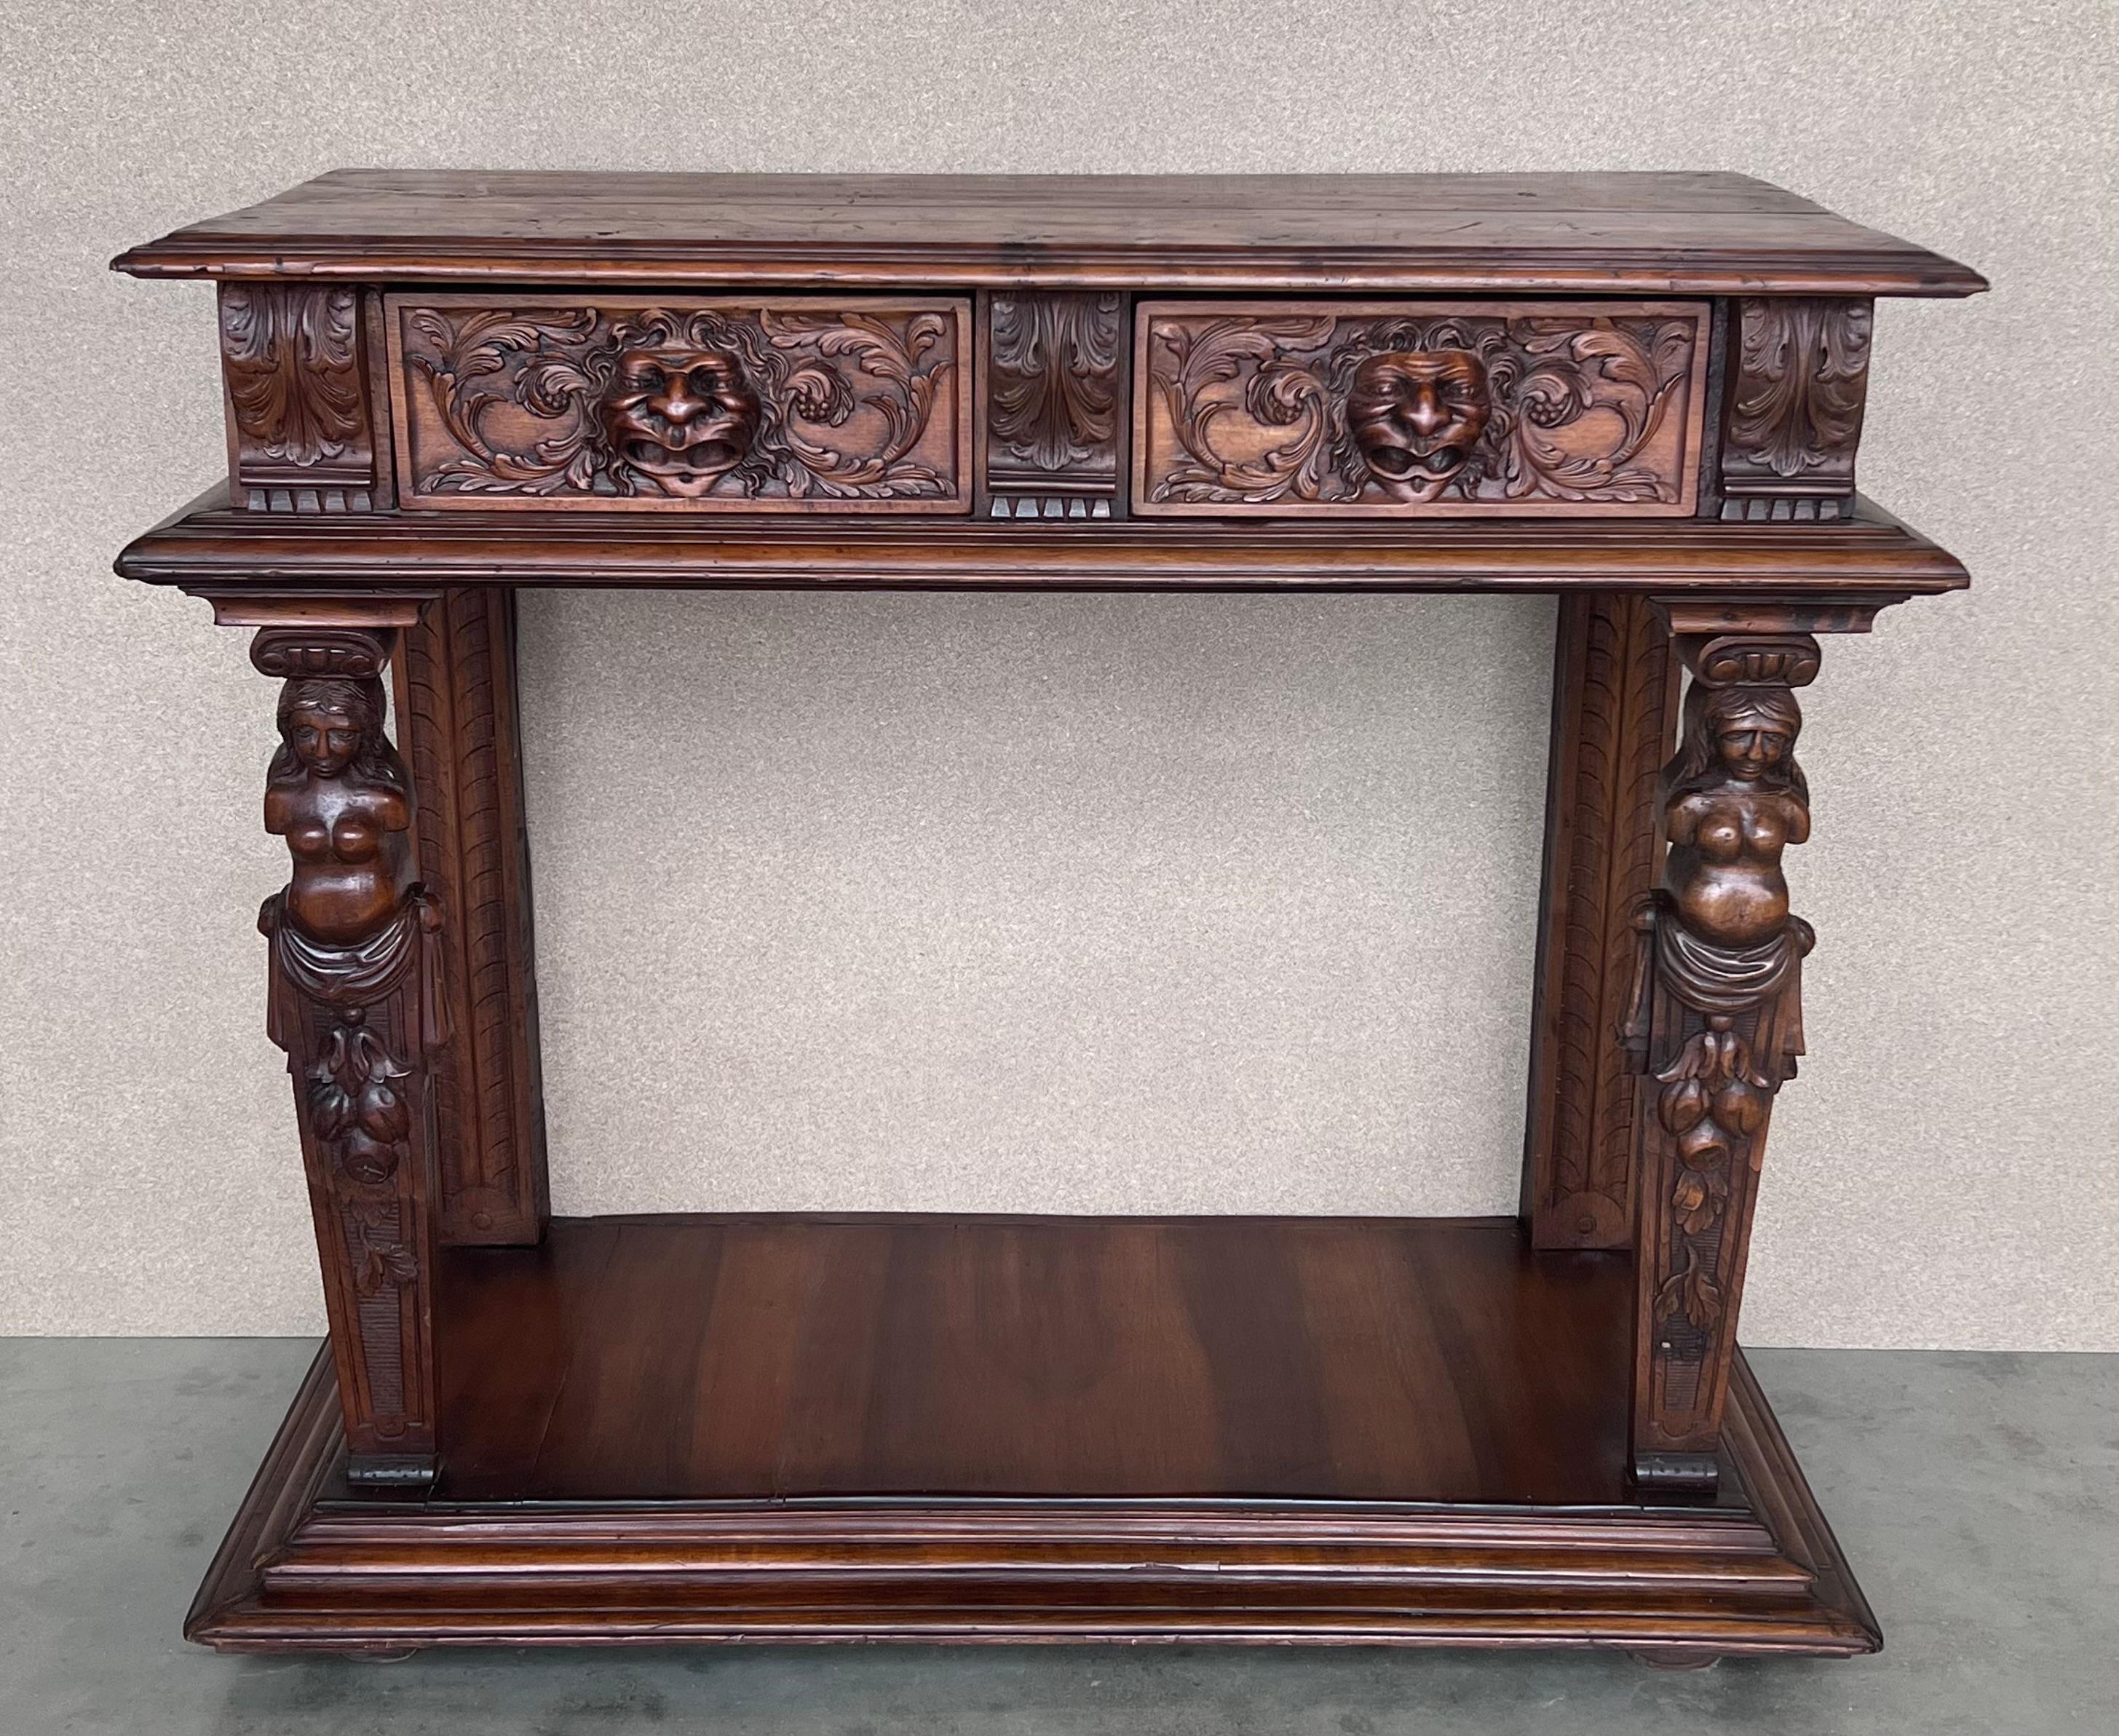 20th century console carved table Renaissance made of solid walnut wood 
It features carvings of mythological animals and plant motifs. Foot with turned rear columns and front columns in the form of mythological figures.